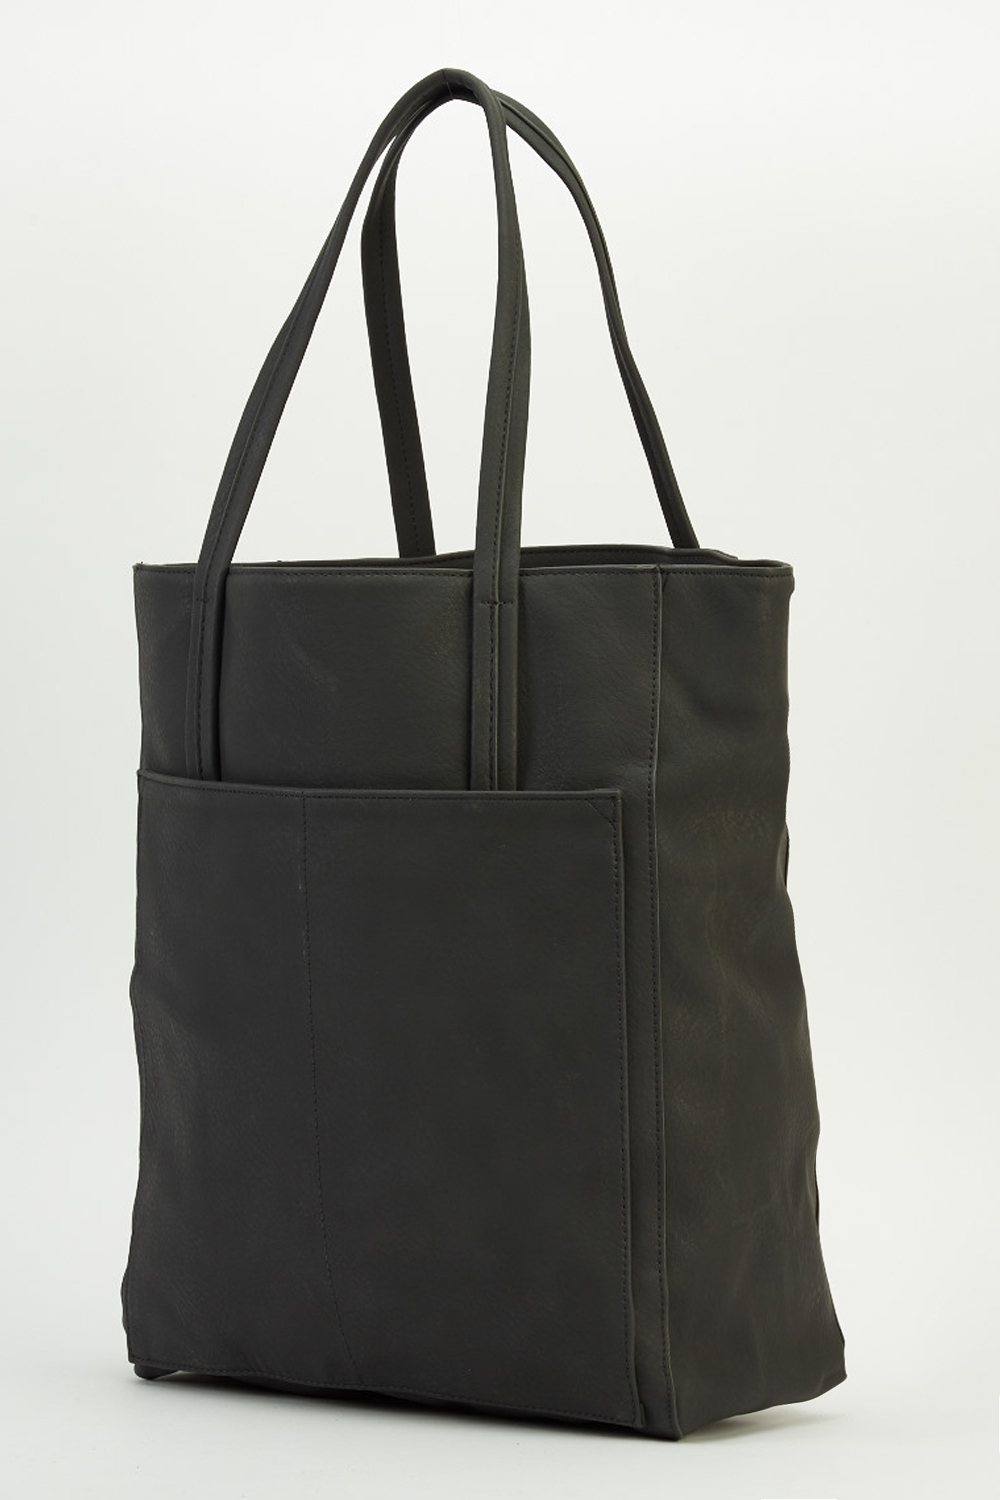 Faux Leather Tote Handbag - Just $7